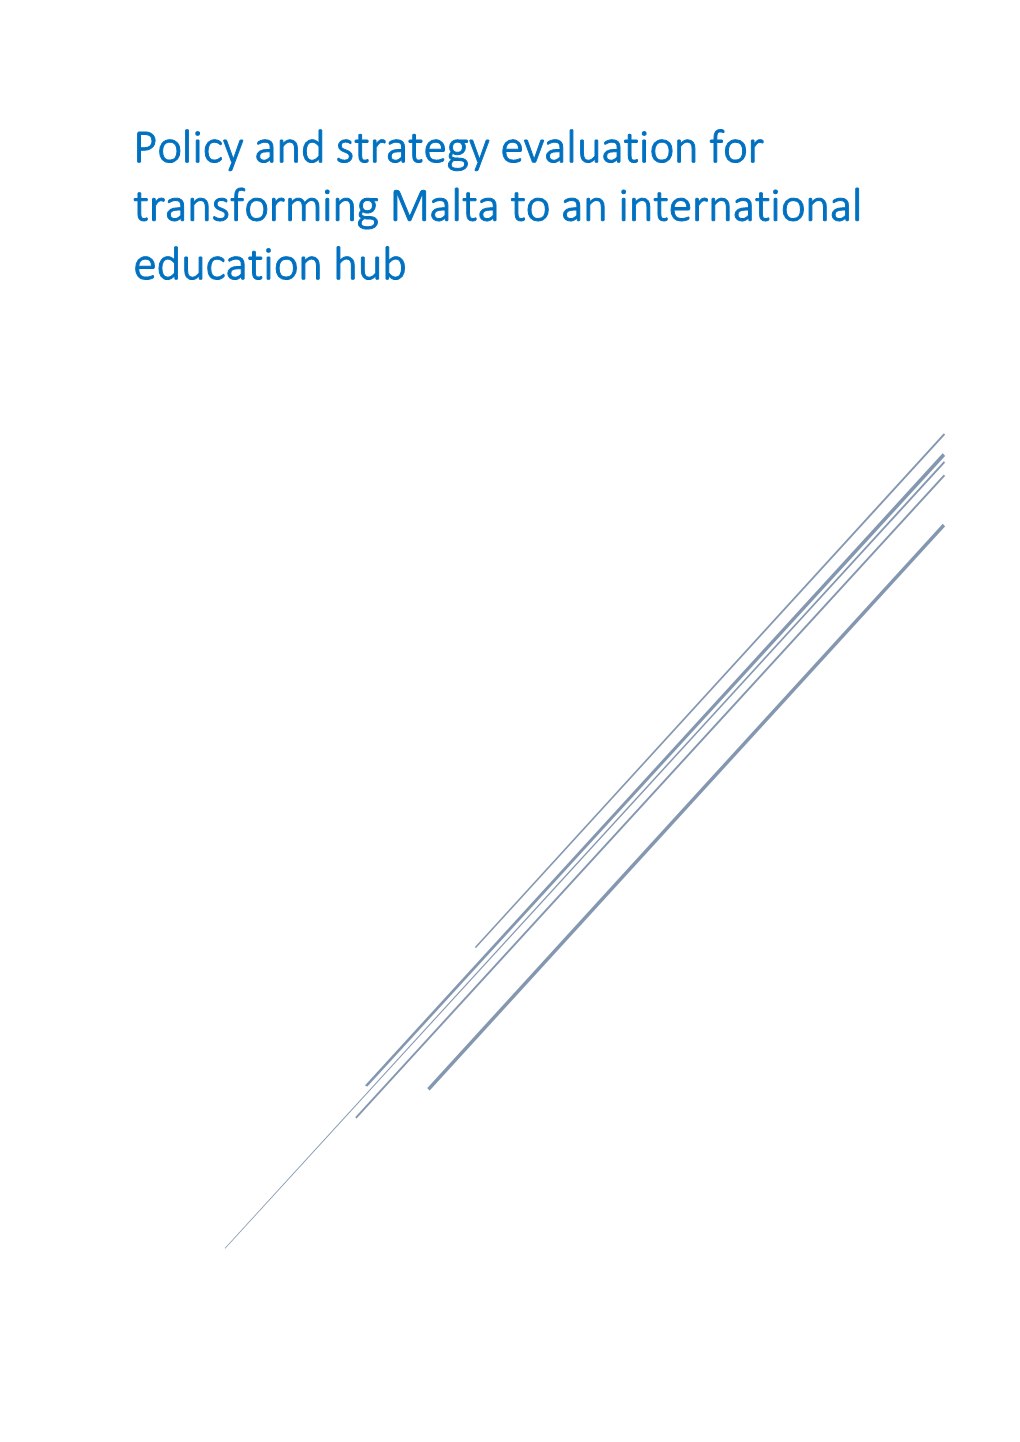 Policy and Strategy Evaluation for Transforming Malta to an International Education Hub